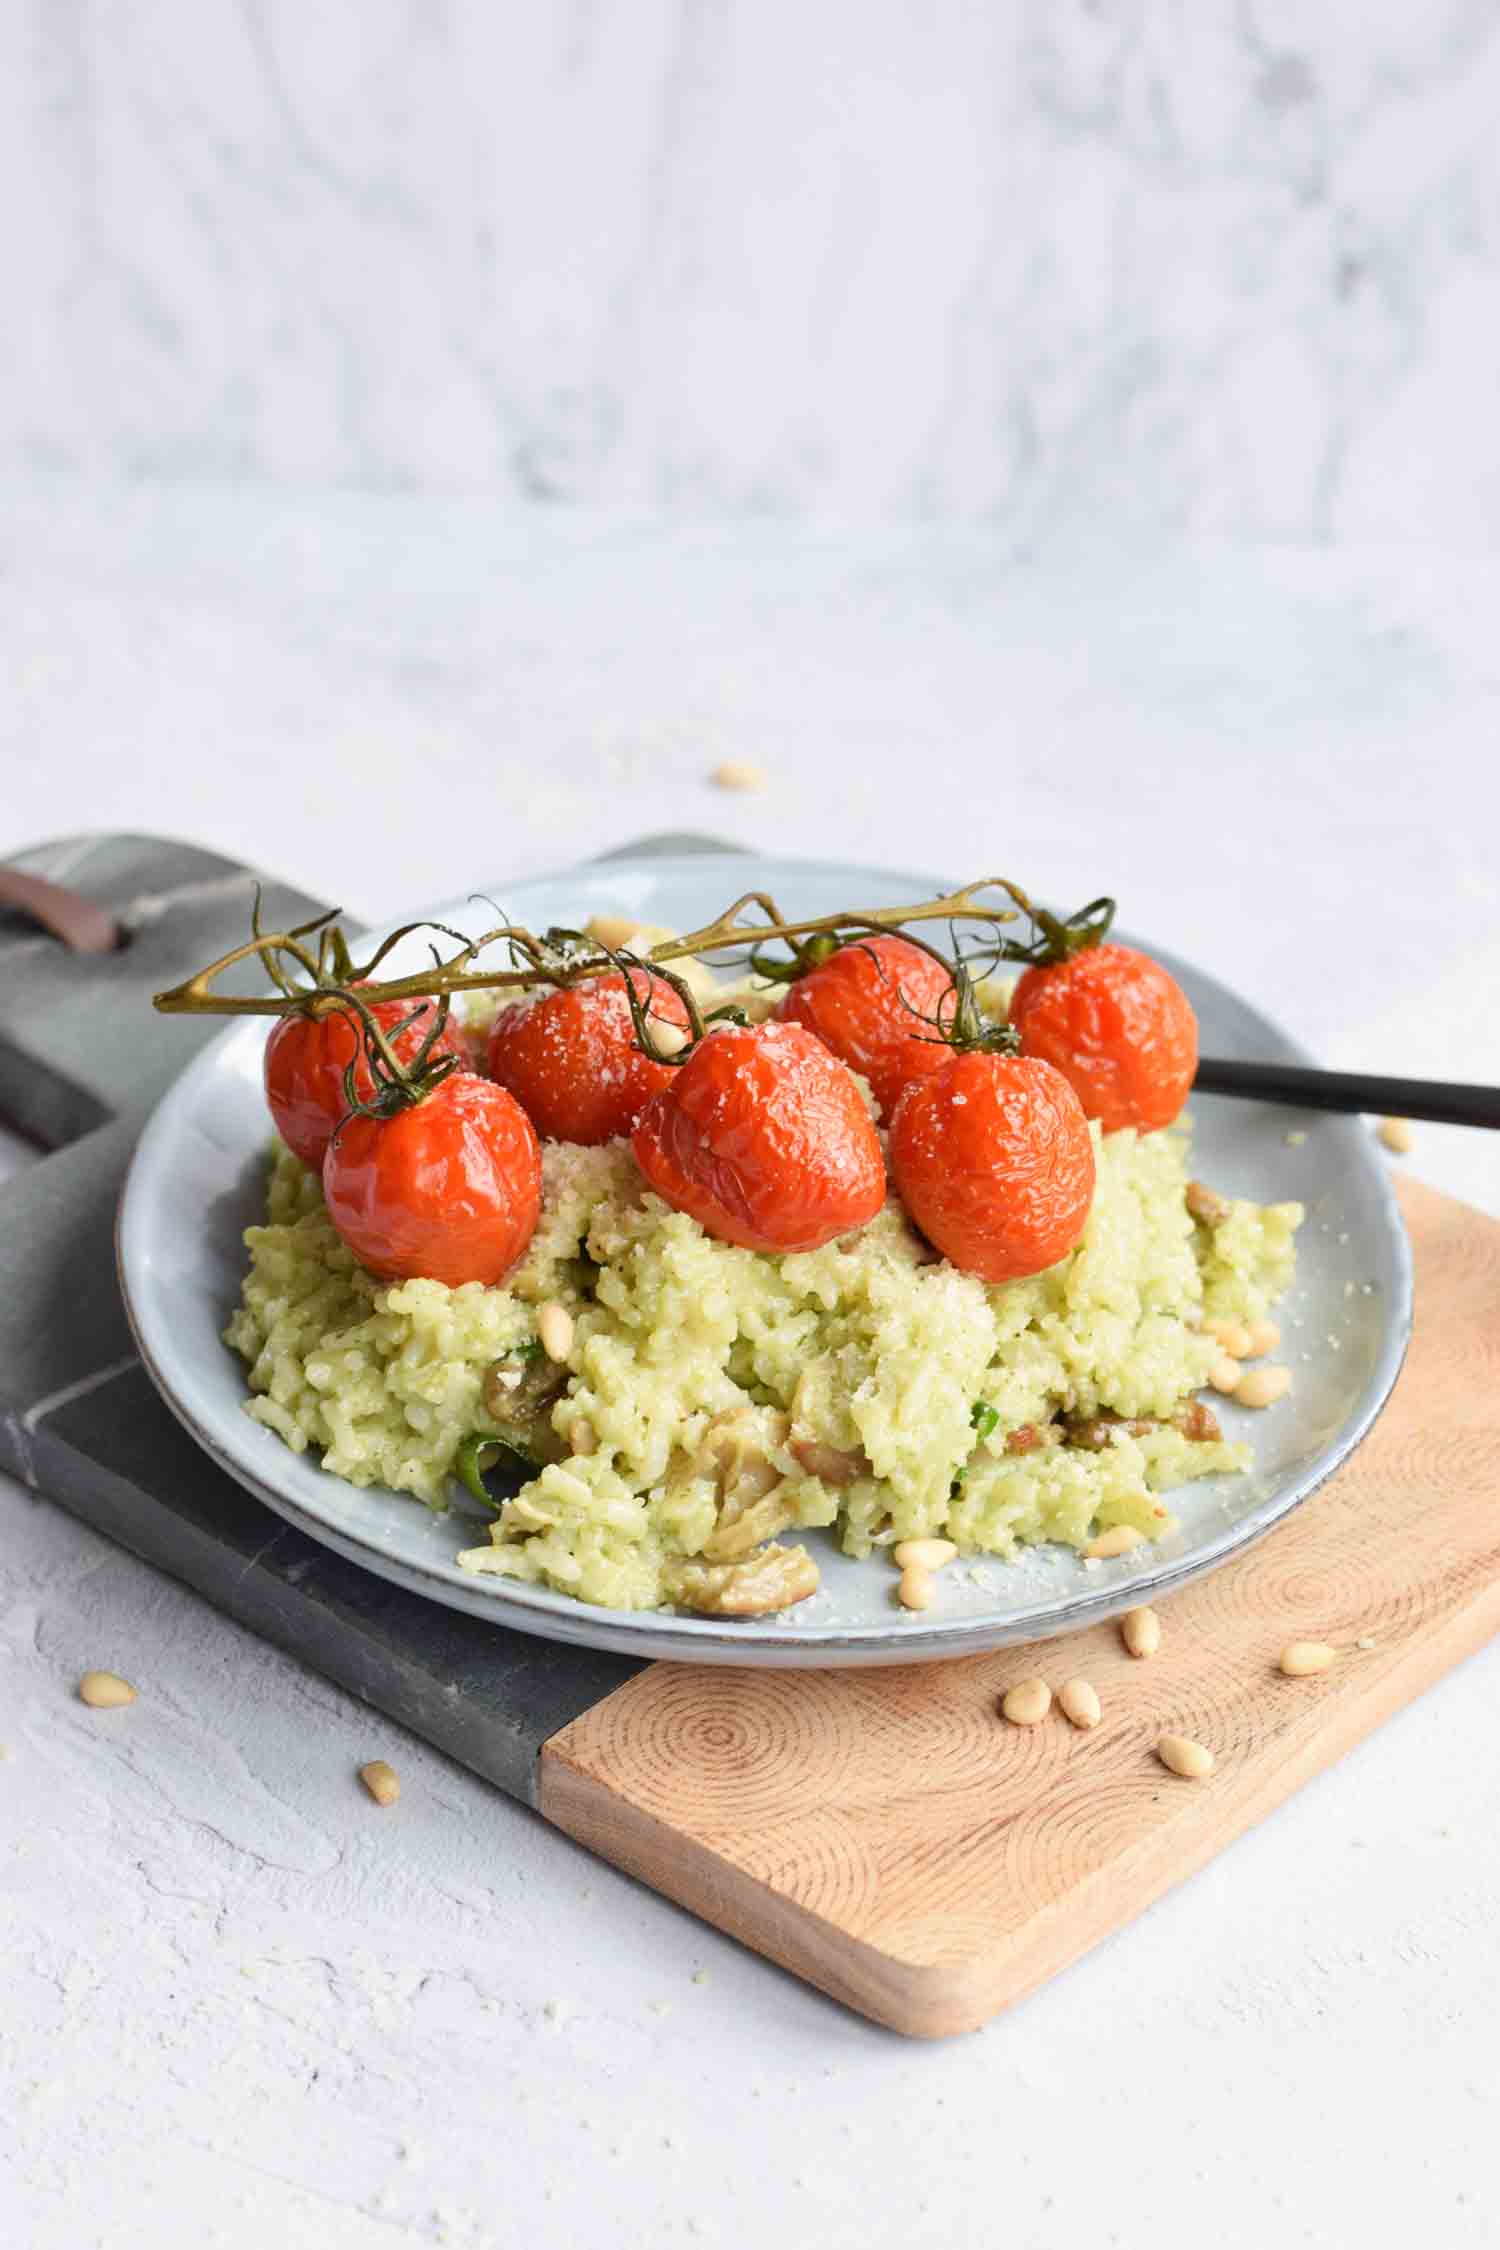 A plate of low FODMAP risotto with pesto and tomatoes